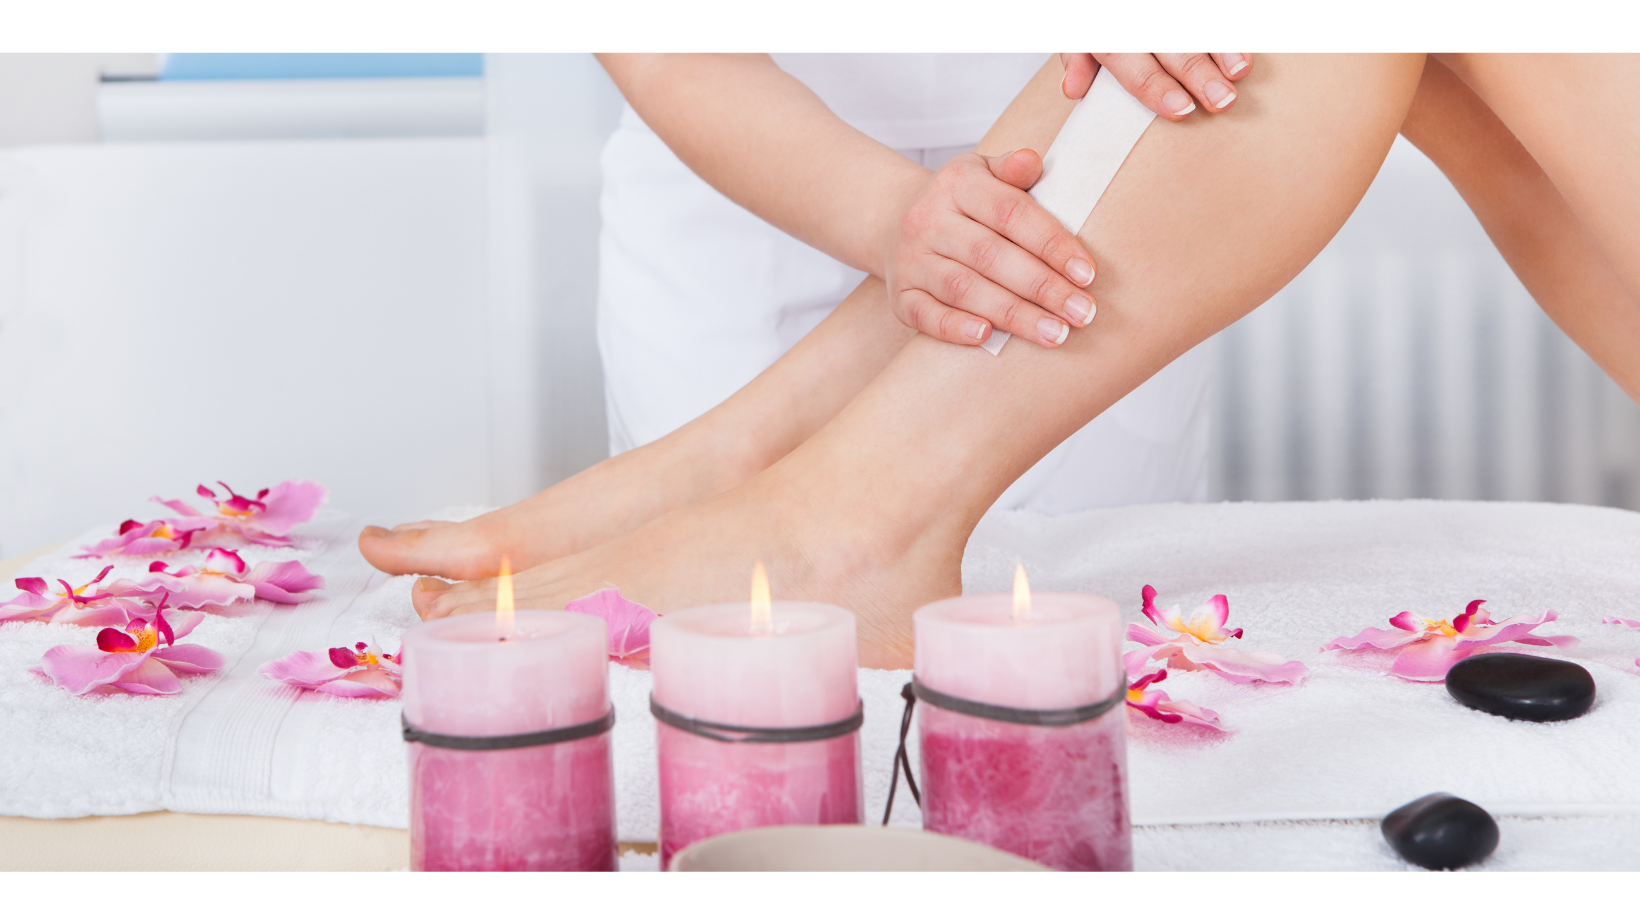 Leg waxing in a serene environment with pink candles and orchid flowers from a skilled Esthetician